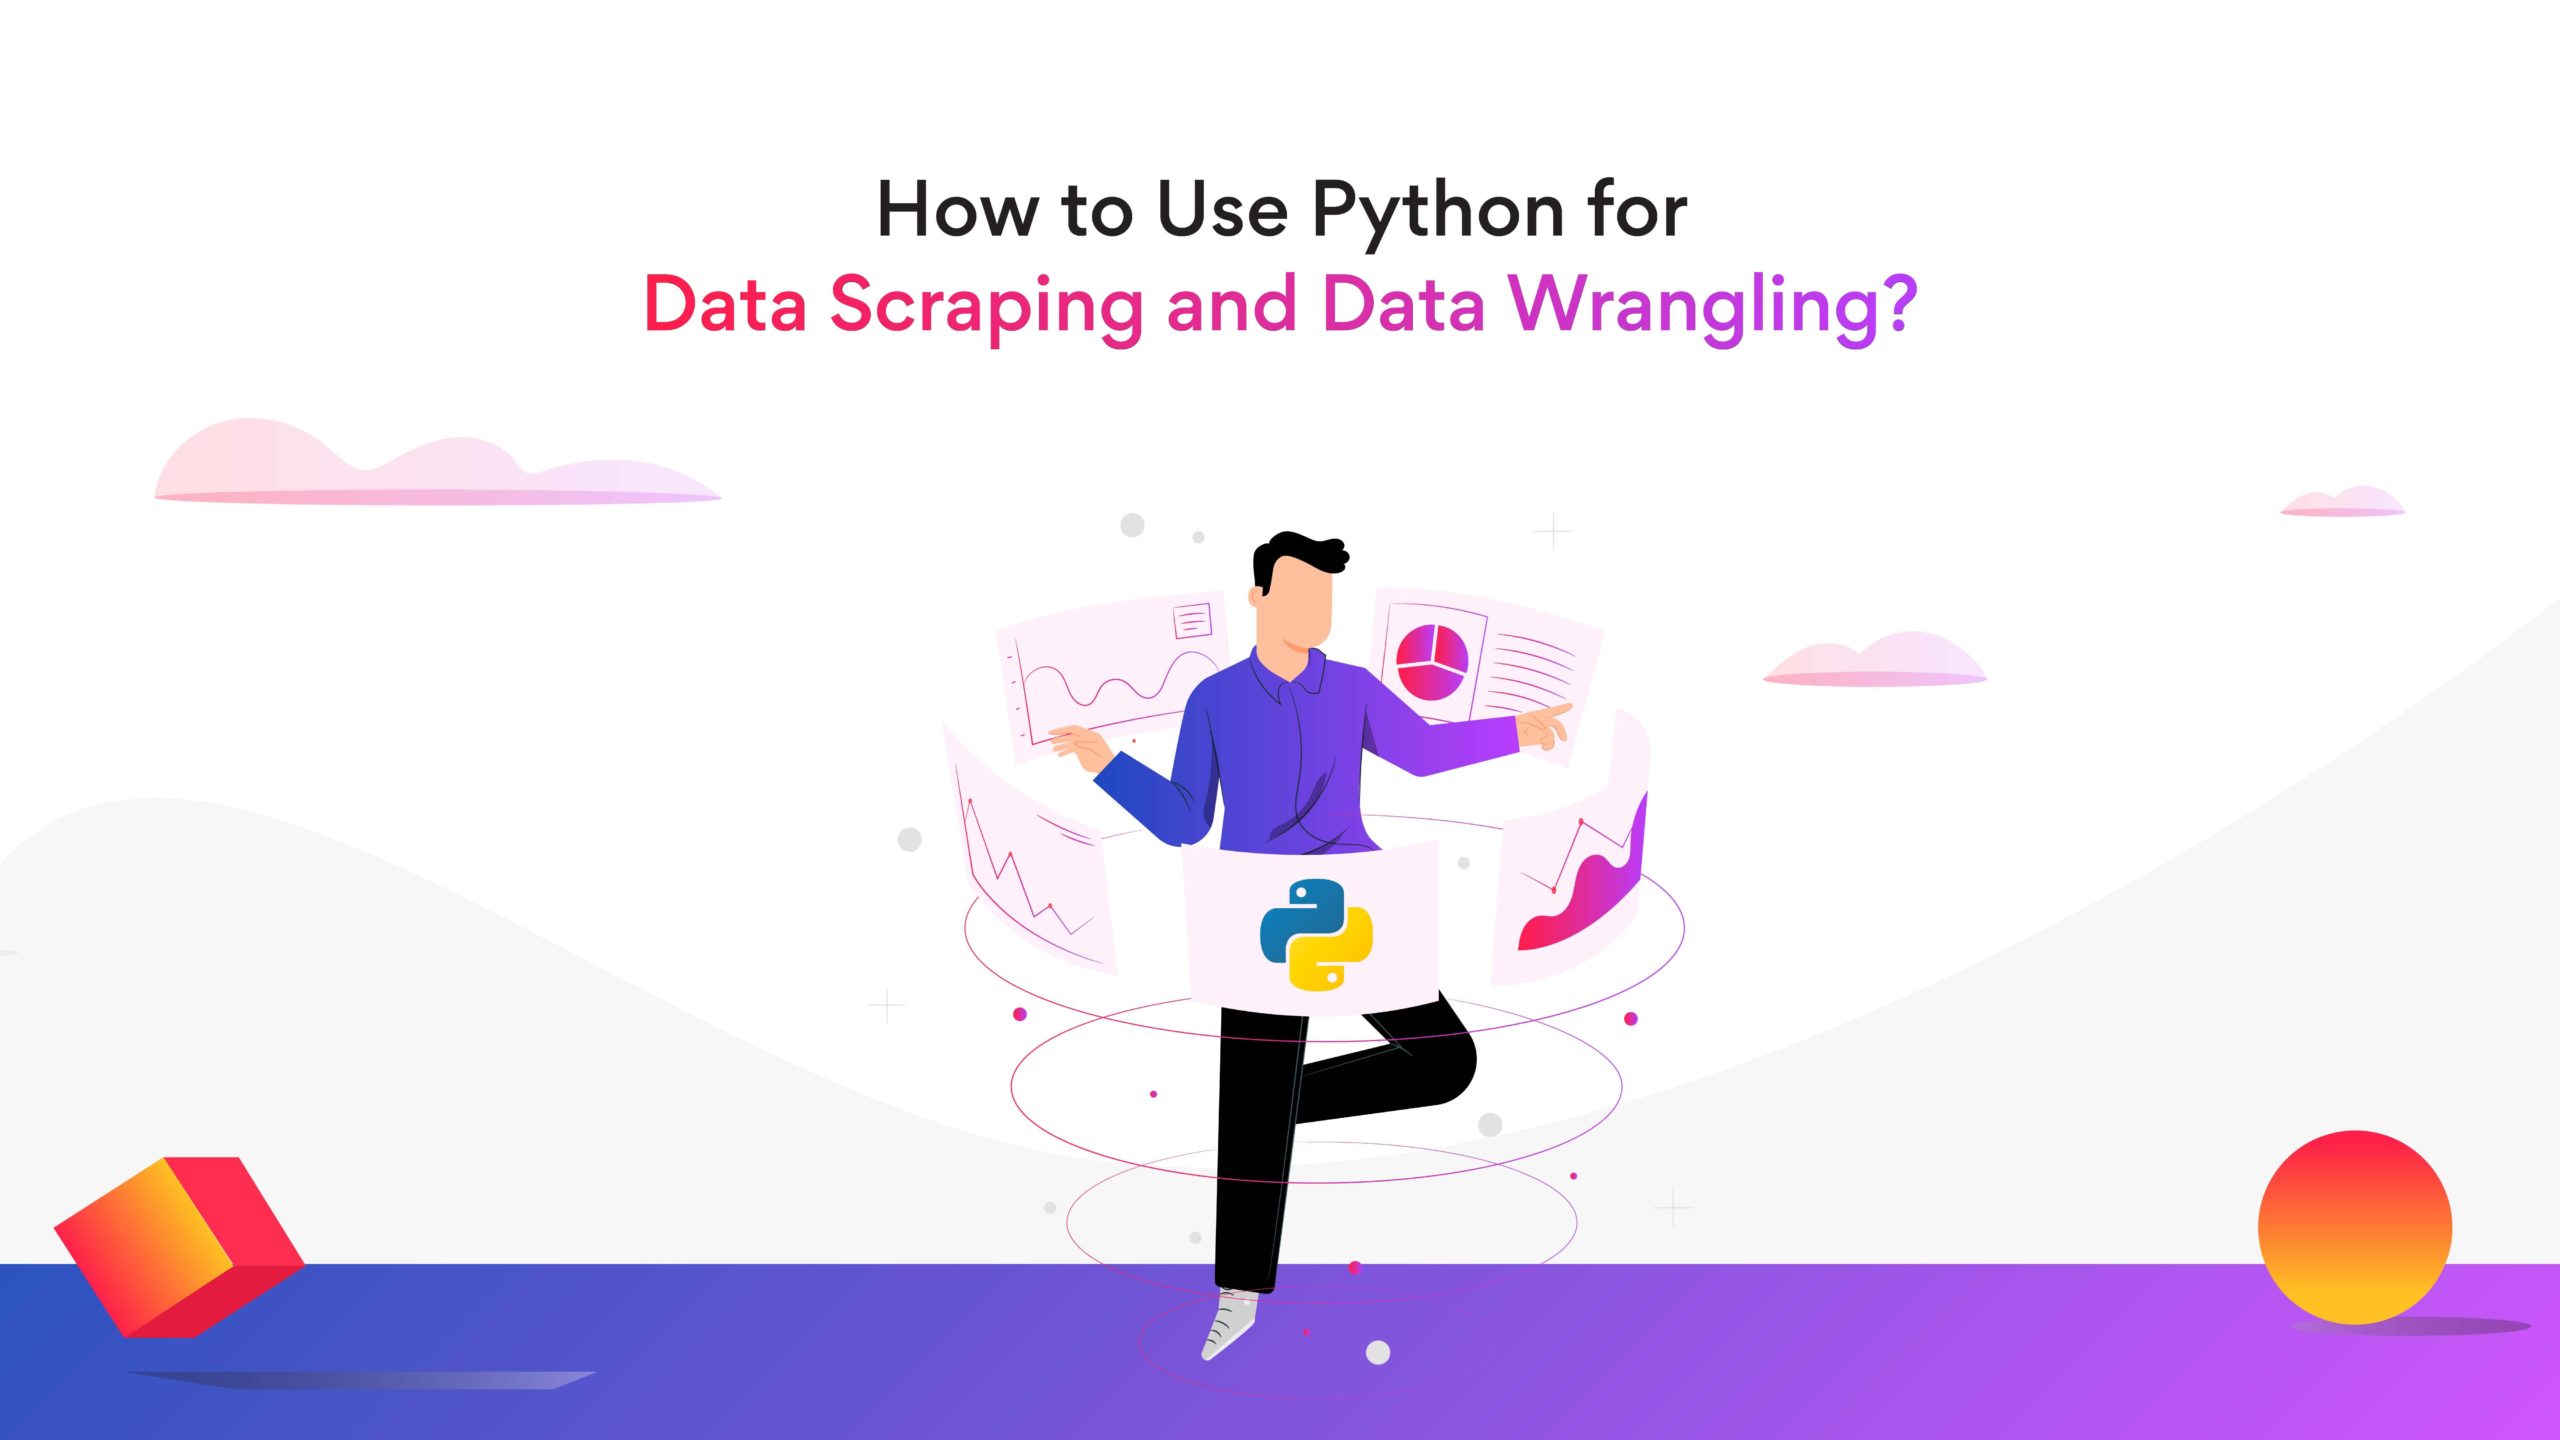 Data scraping and wrangling with Python